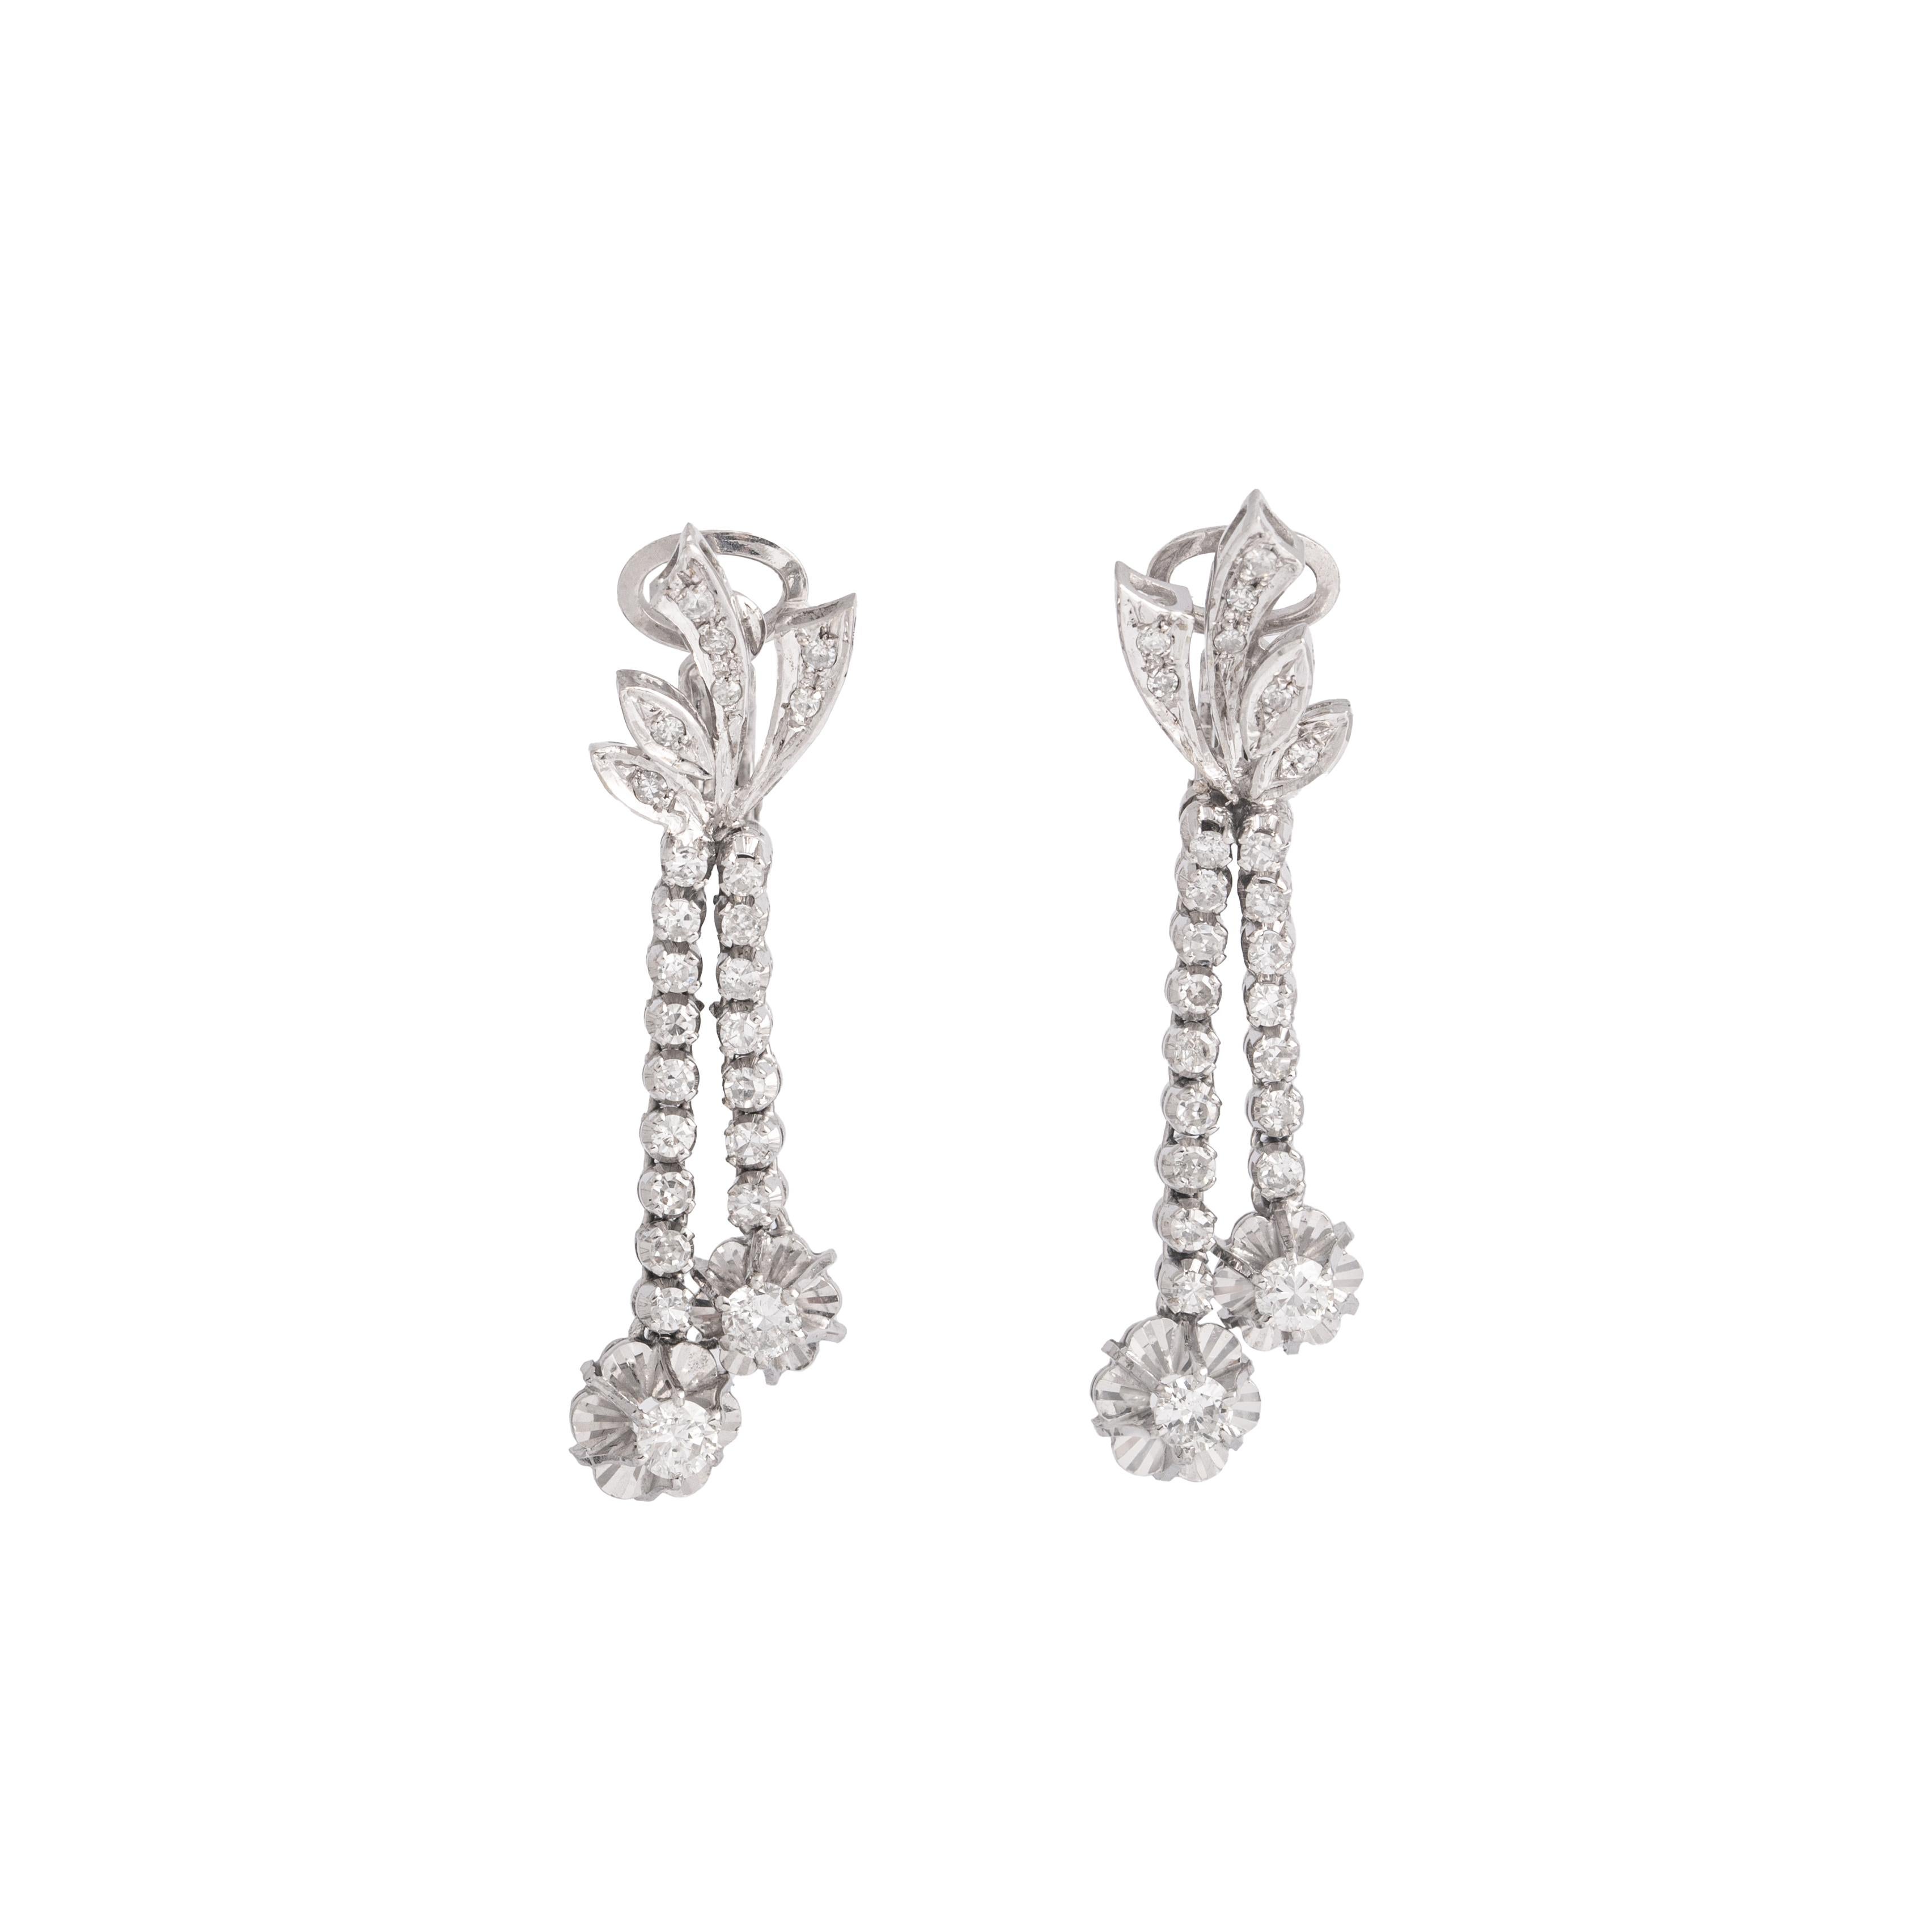 Old mine cut Diamond on White Gold 18K Earrings.
Late 20th Century.

Length: approx. 4.50 centimeters.
Total weight: 14.01 grams.
